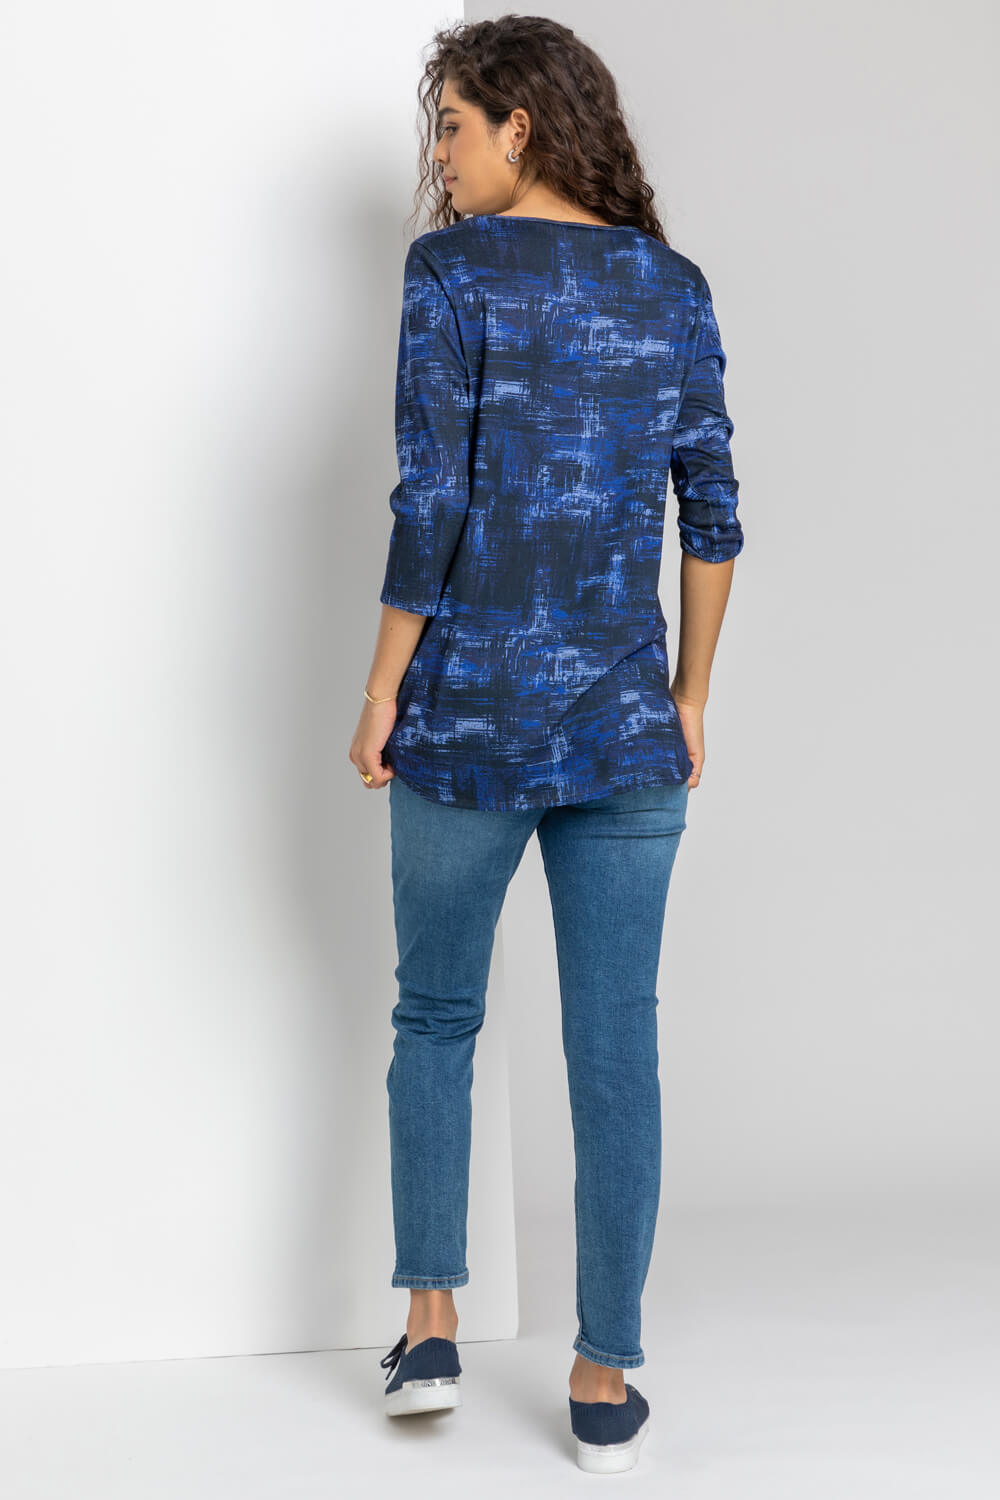 Midnight Blue Abstract Print Pocket Tunic Top, Image 2 of 5